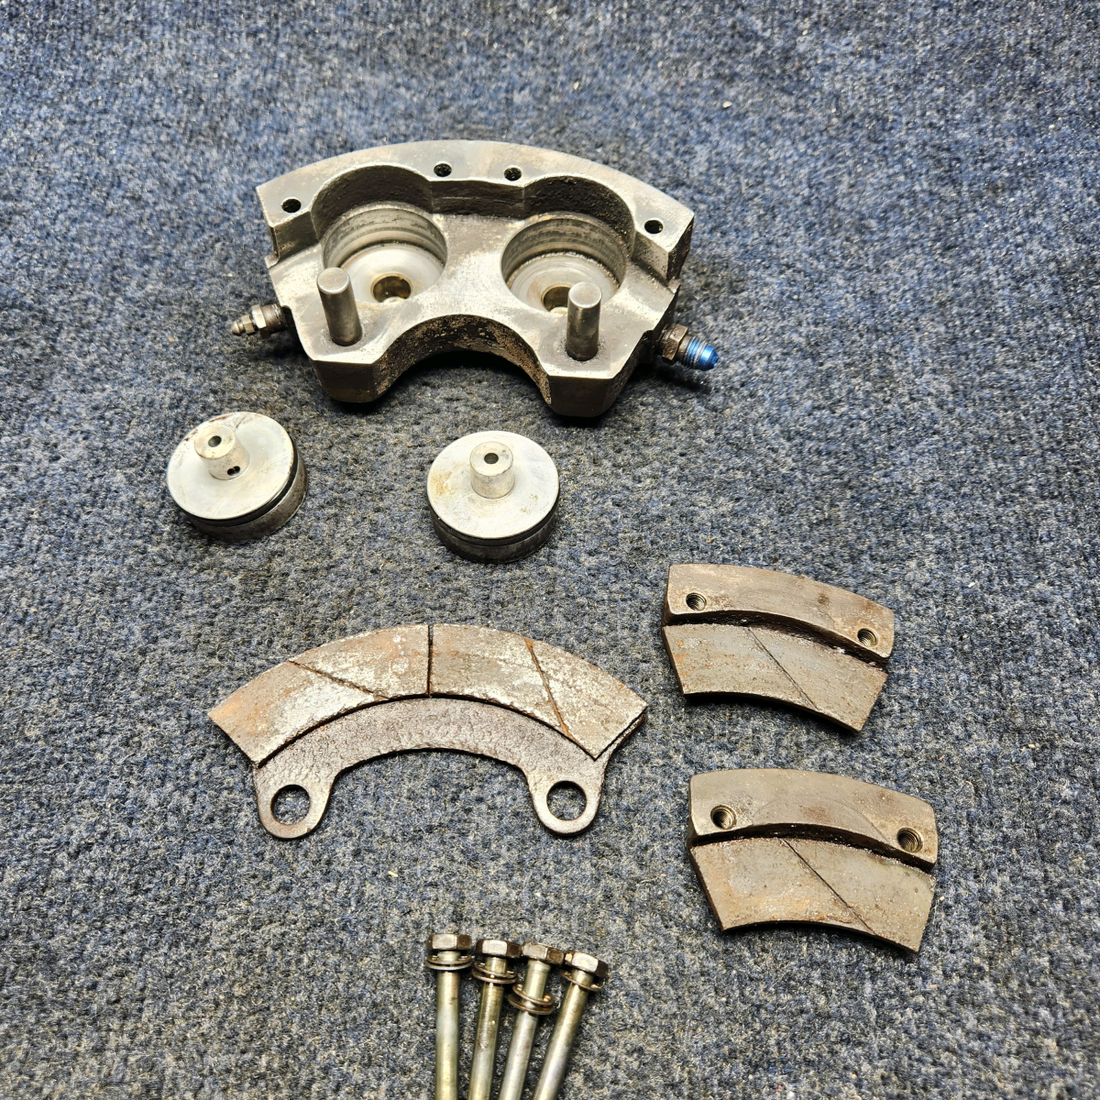 Used aircraft parts for sale, 30-83A Cleveland Piper PA32RT-300 BRAKE CALIPER ASSEMBLY LH OR RH